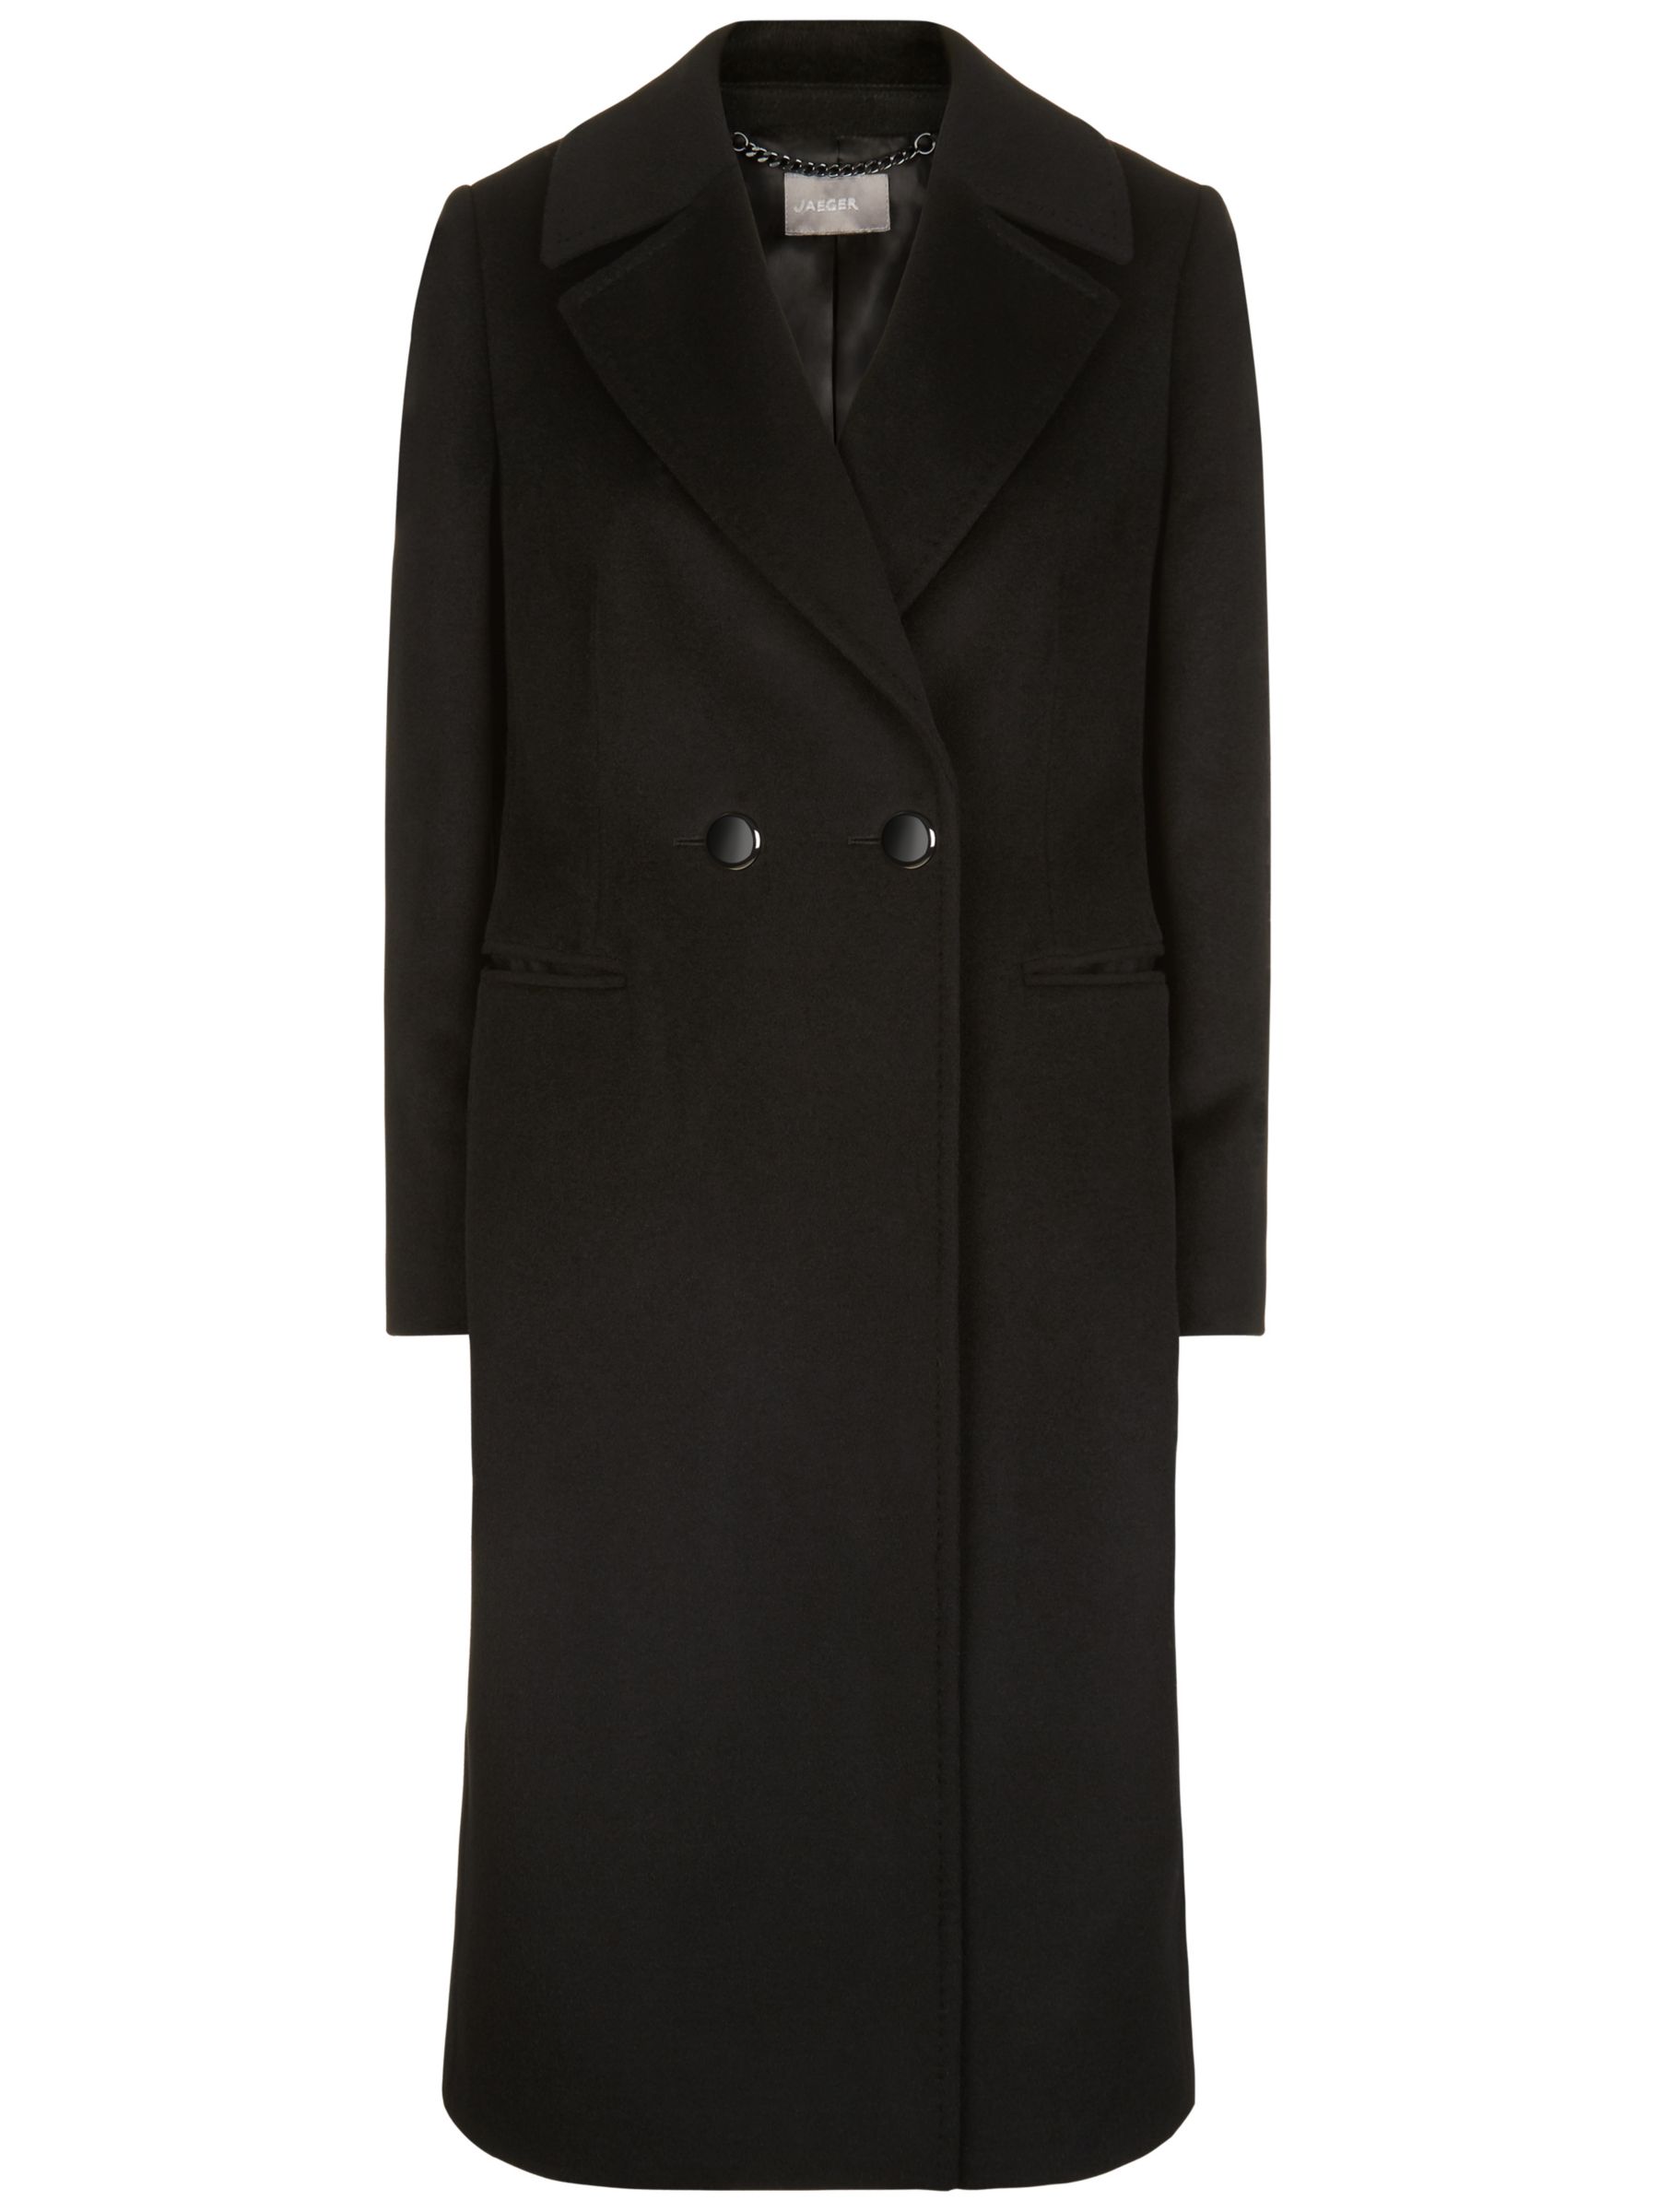 Jaeger Wool Double Breasted Coat, Black